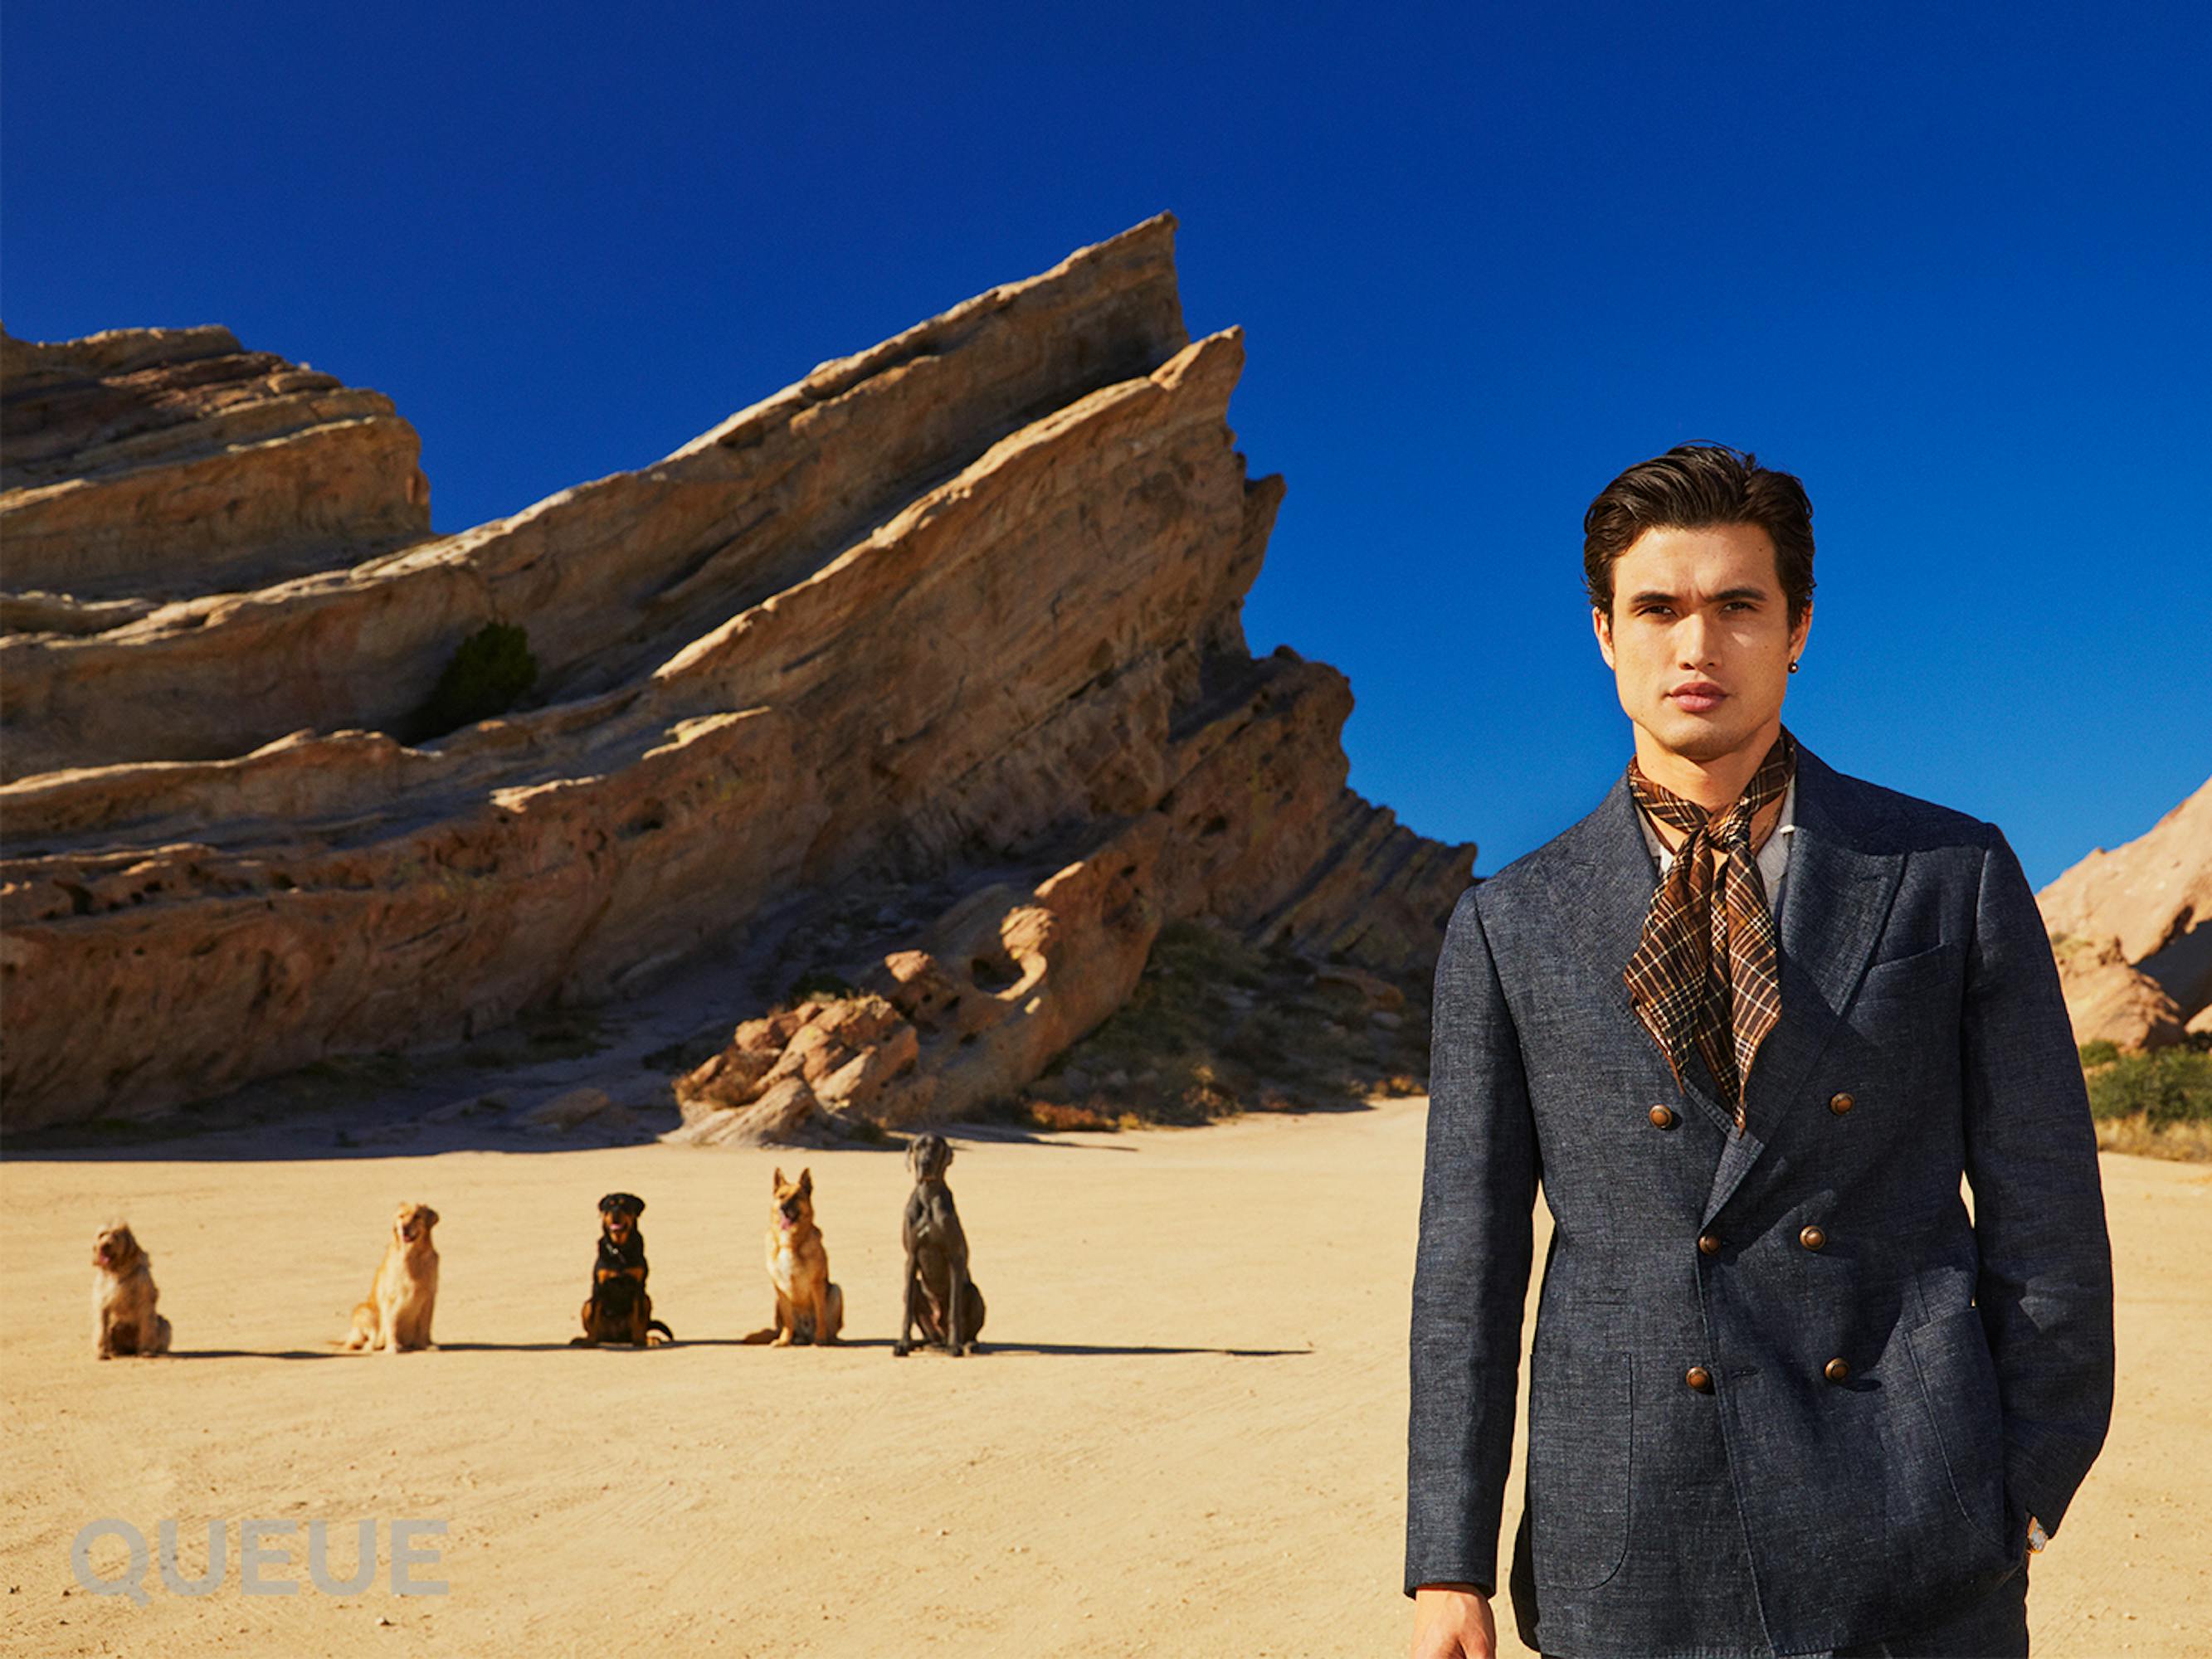 Charles Melton wears a smart suit and neck tie while standing in front of a breathtaking rock formation at the Vasquez Rocks Natural Area and Nature Center in Agua Dulce, California; an obedient group of dogs sit in a single file line behind him from shortest to tallest, mirroring the shape of the rock formation.